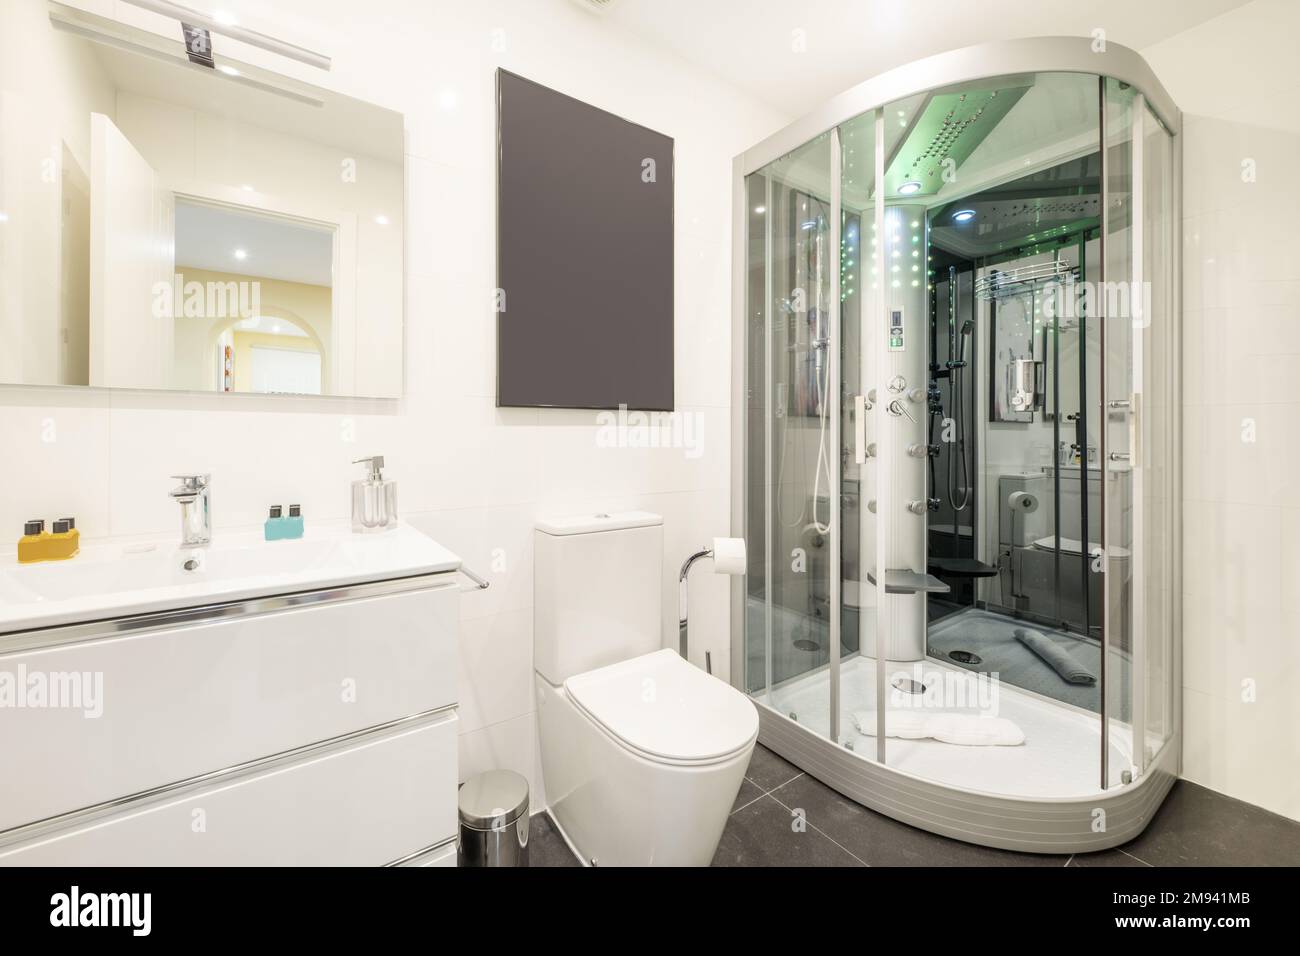 Bathroom with built-in mirror, white chest of drawers with sink and galactic shower cabin with jets, RGB lights, FM radio, seat and mirrors Stock Photo